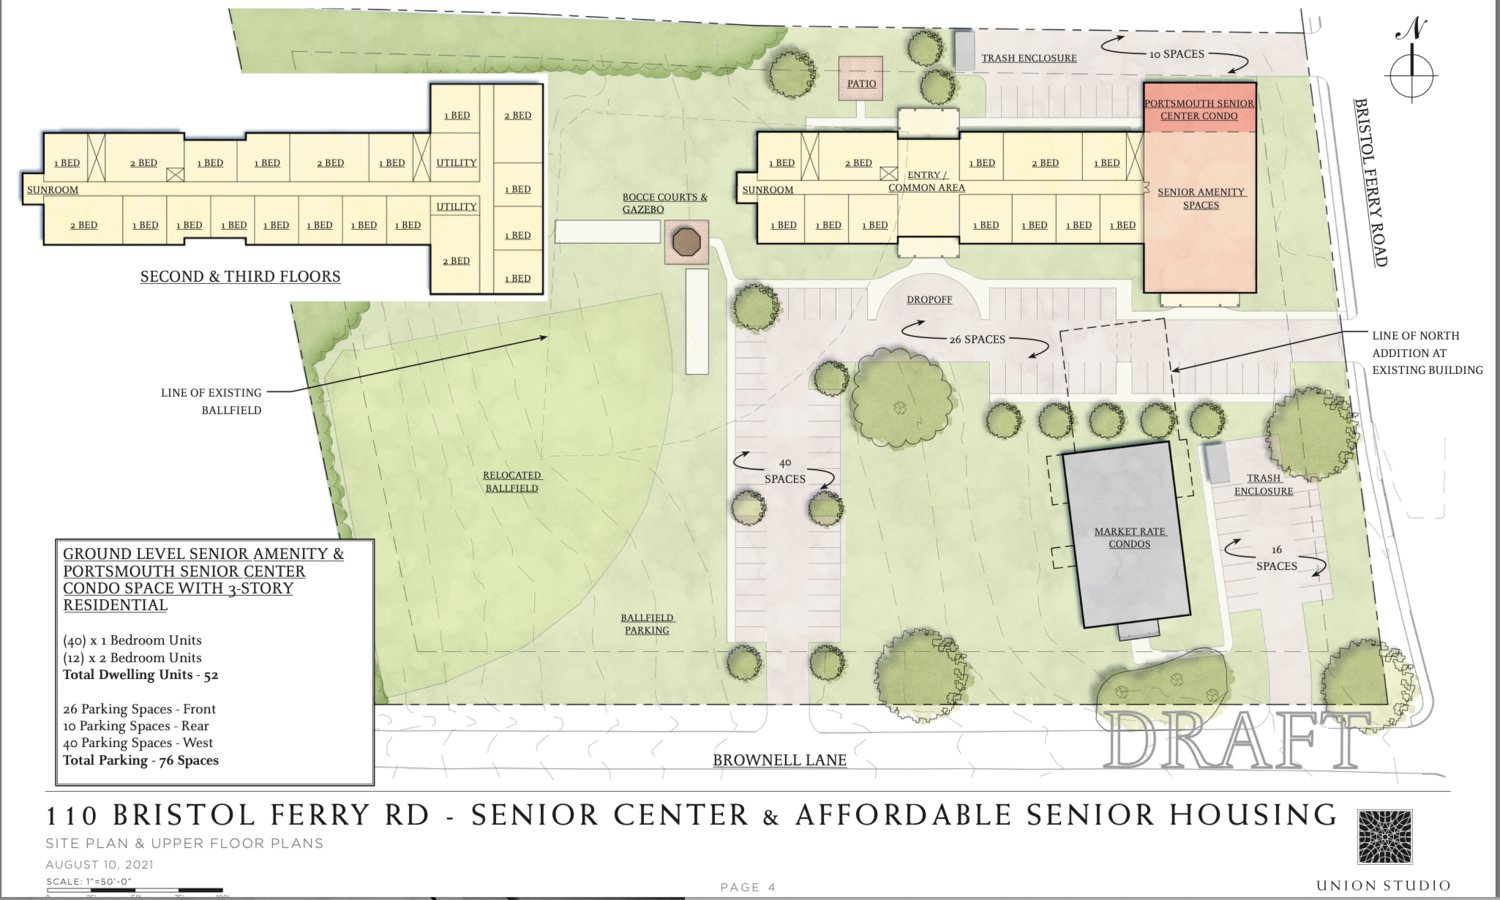 An overhead look at the layout of the proposed development. The yellow floor plan in the upper left is not a separate building, but rather the second and third floors of the affordable housing unit attached to the new proposed senior center at top right. Part of the existing senior center building, in gray, would remain but converted into market-rate condos to help with financing. Diagram also shows new parking, a gazebo and the relocated ball field.